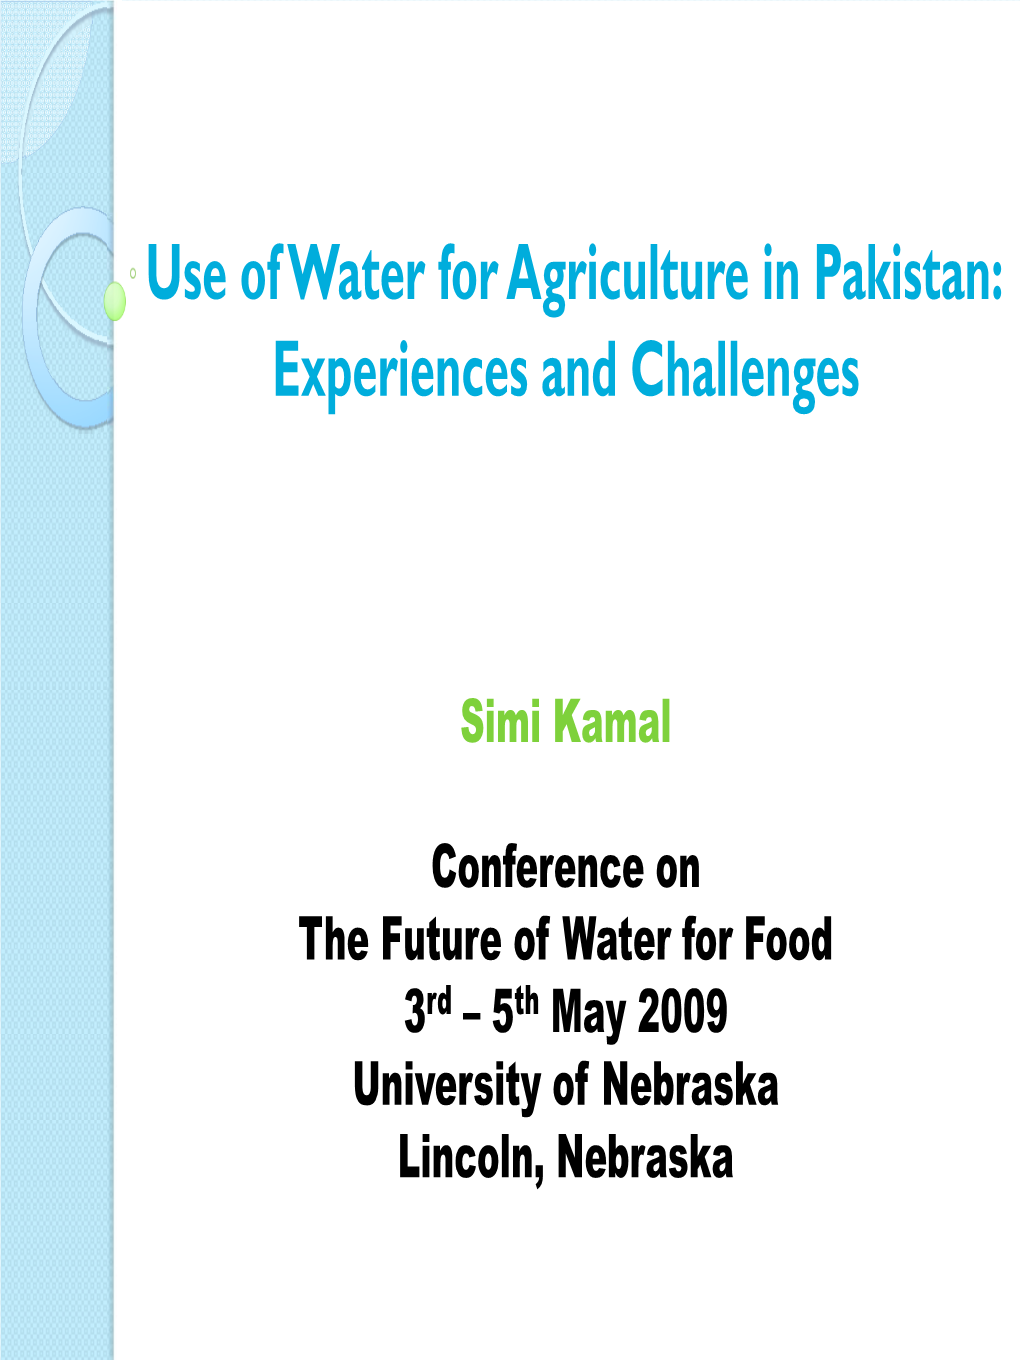 Use of Water for Agriculture in Pakistan: Experiences and Challenges